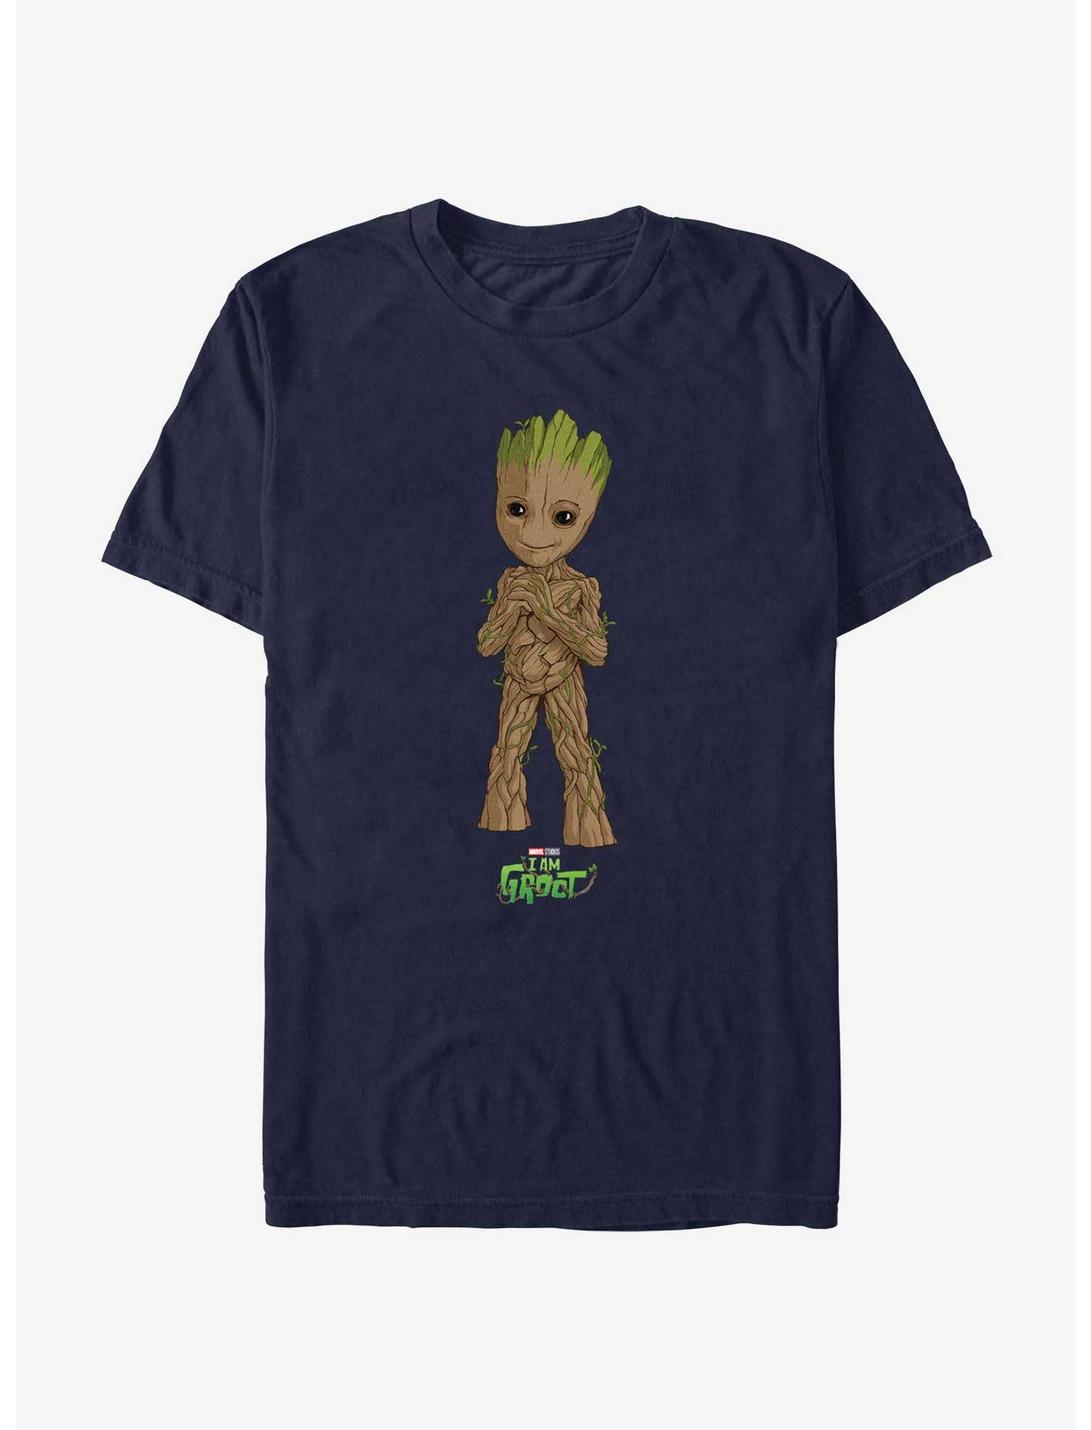 Marvel Guardians Of The Galaxy Cute Groot T-Shirt, NAVY, hi-res